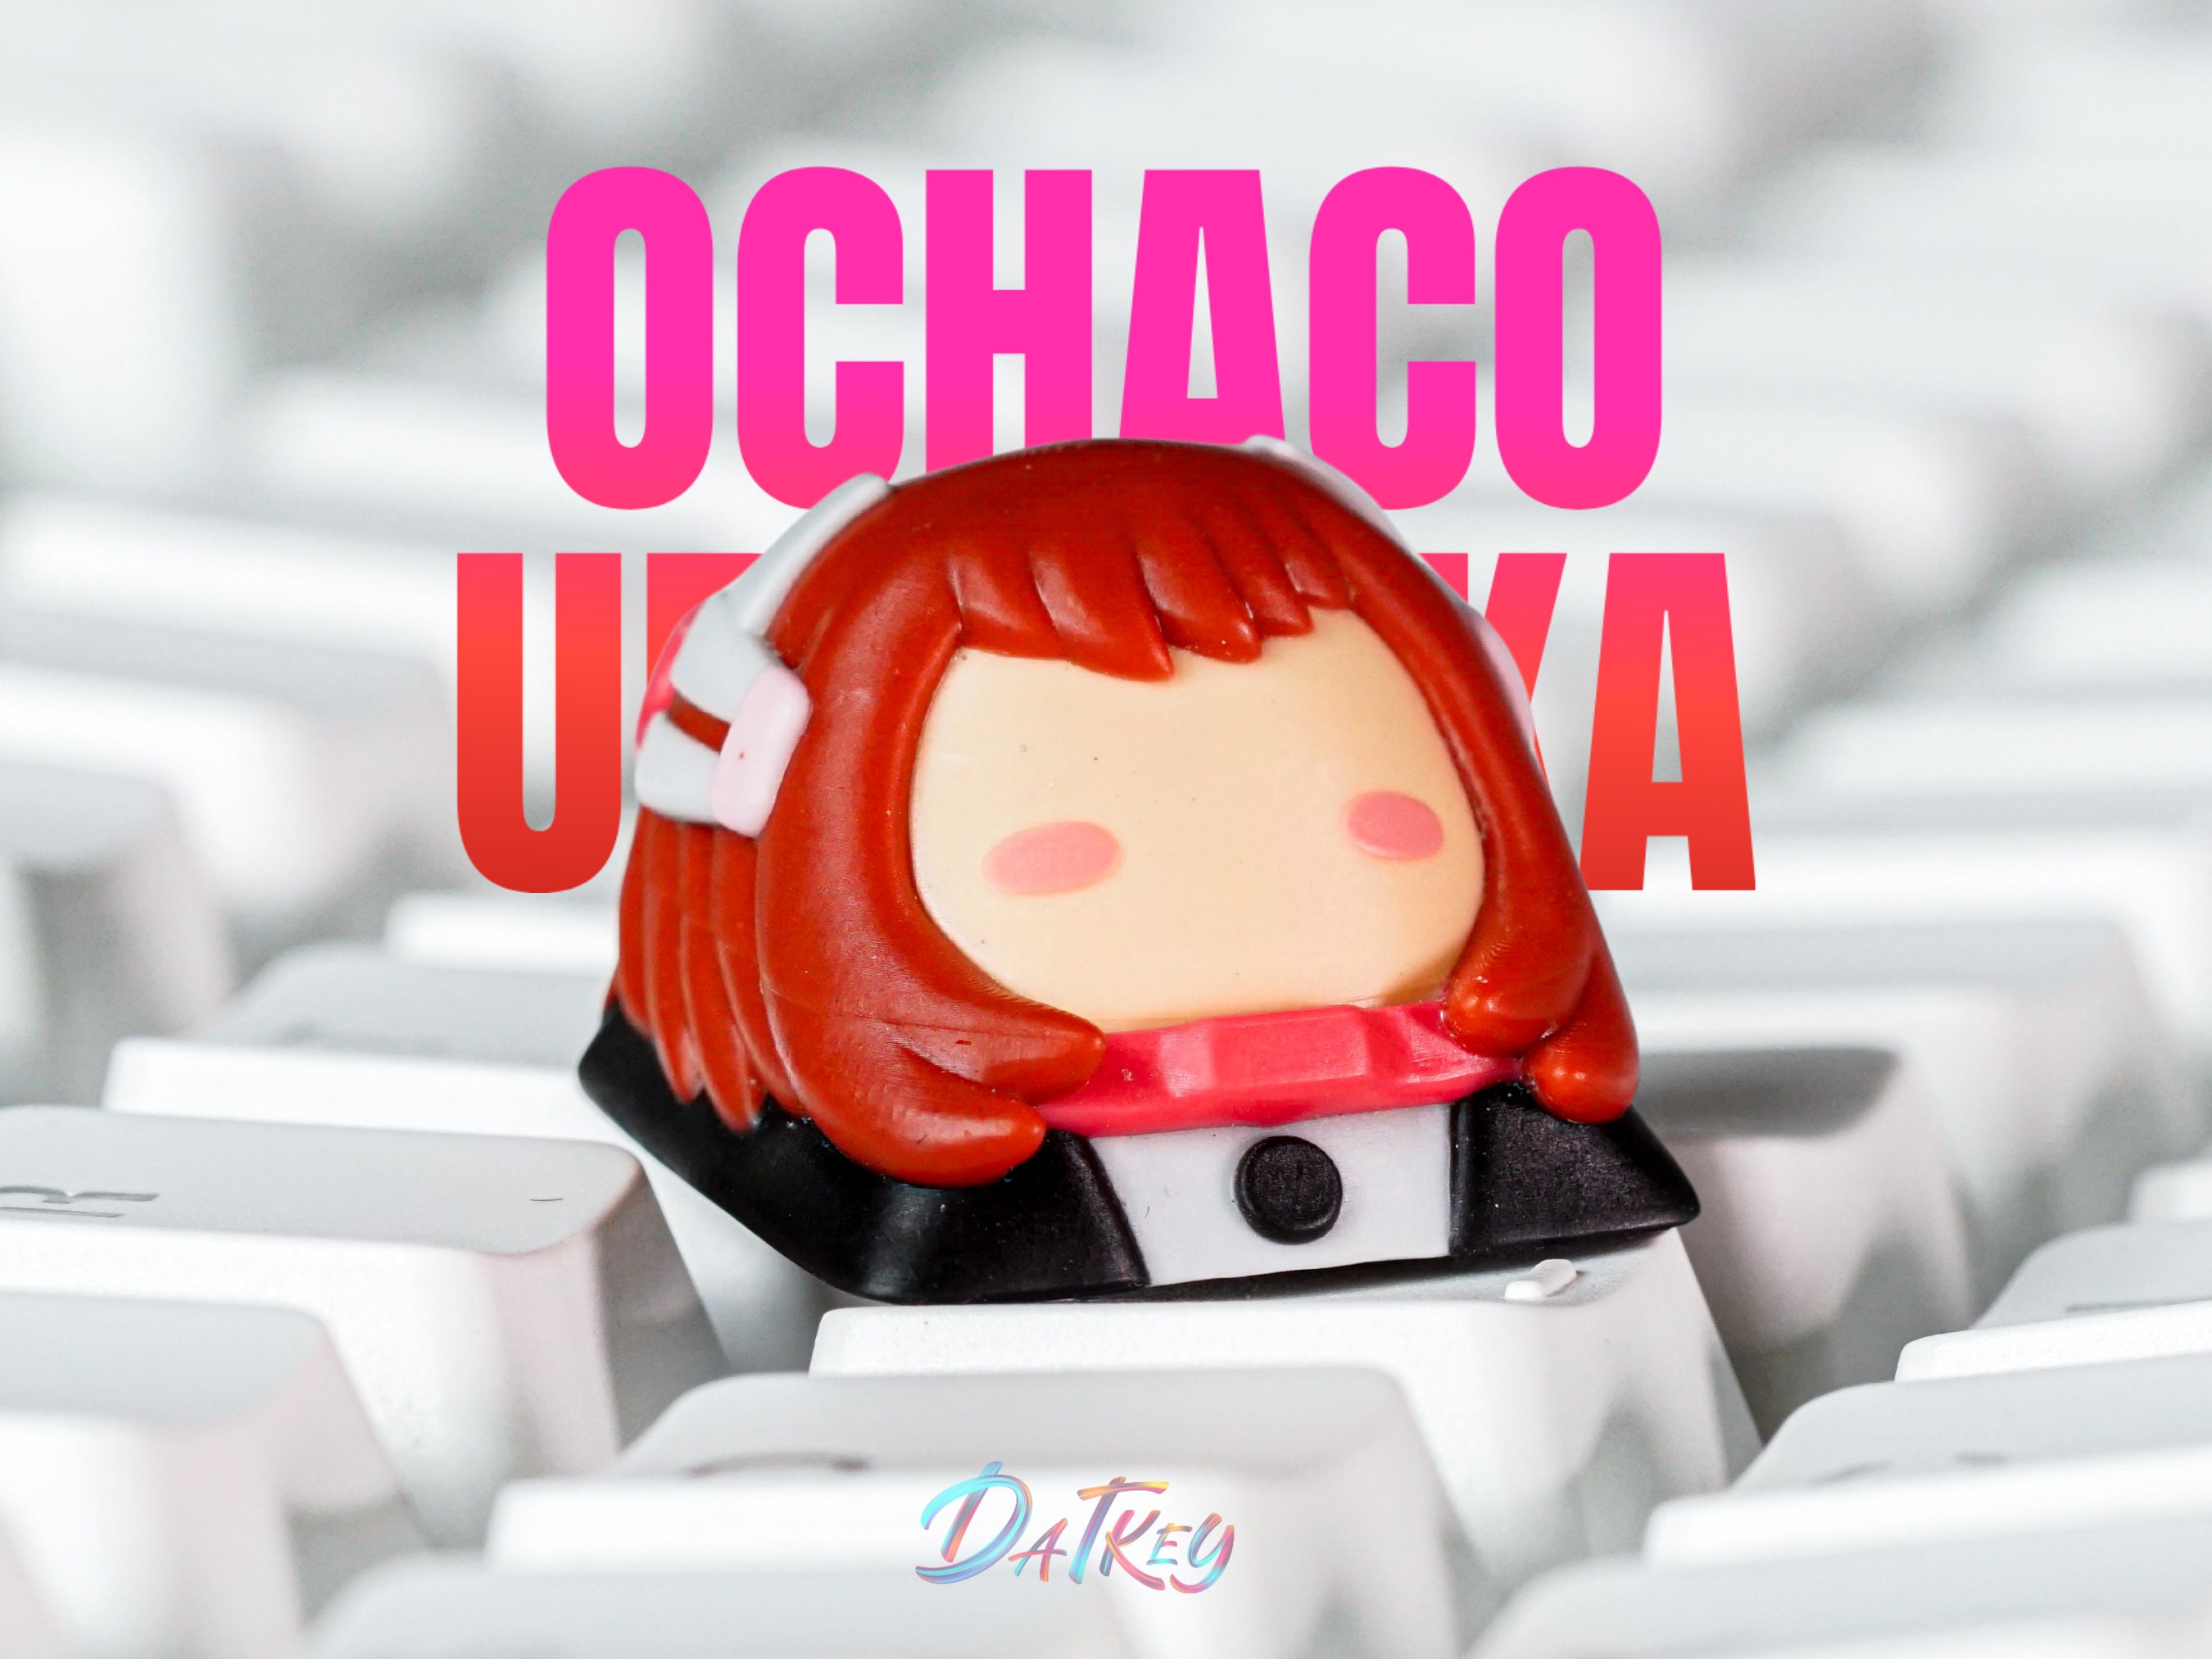 O.cha.co Ura.ra.ka Keycap, B.N.H.A Keycap, Anime Keycap, Keycap for MX Cherry Switches Mechanical Keyboard, Handmade Anime Gift